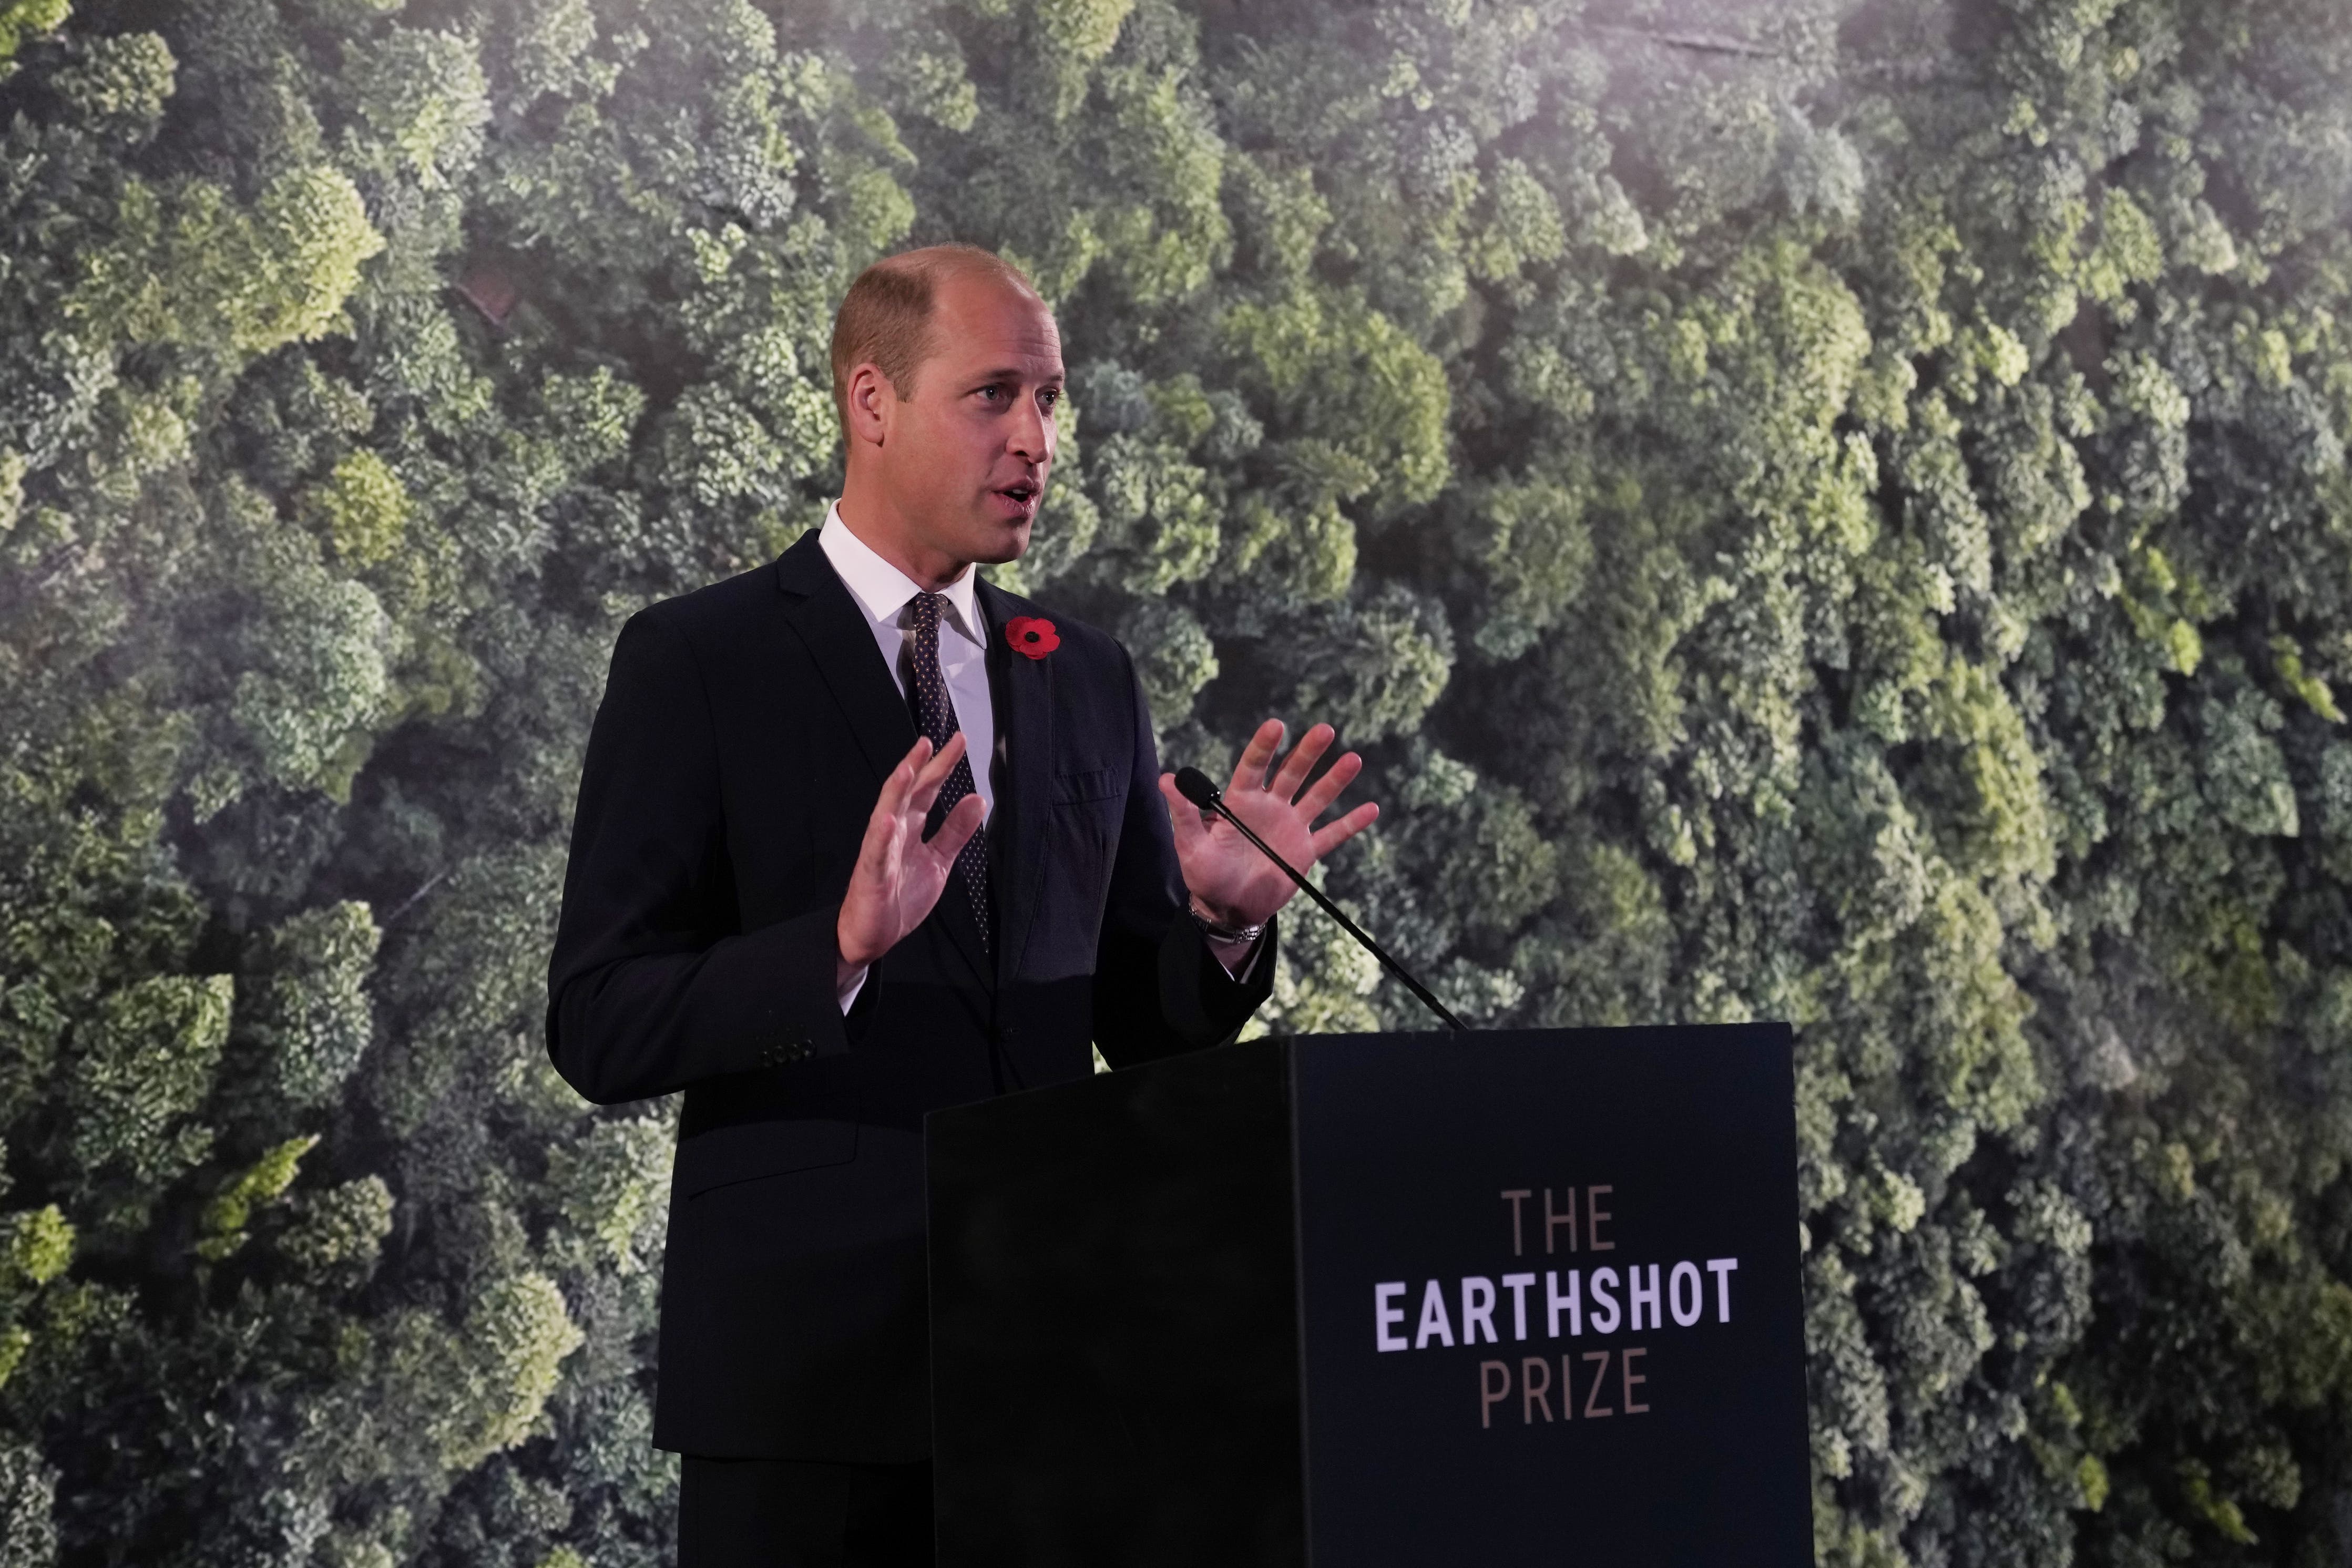 The Prince of Wales whose ambitious 10-year £50 million prize is designed to find solutions to repair and regenerate the earth (Alastair Grant/PA)